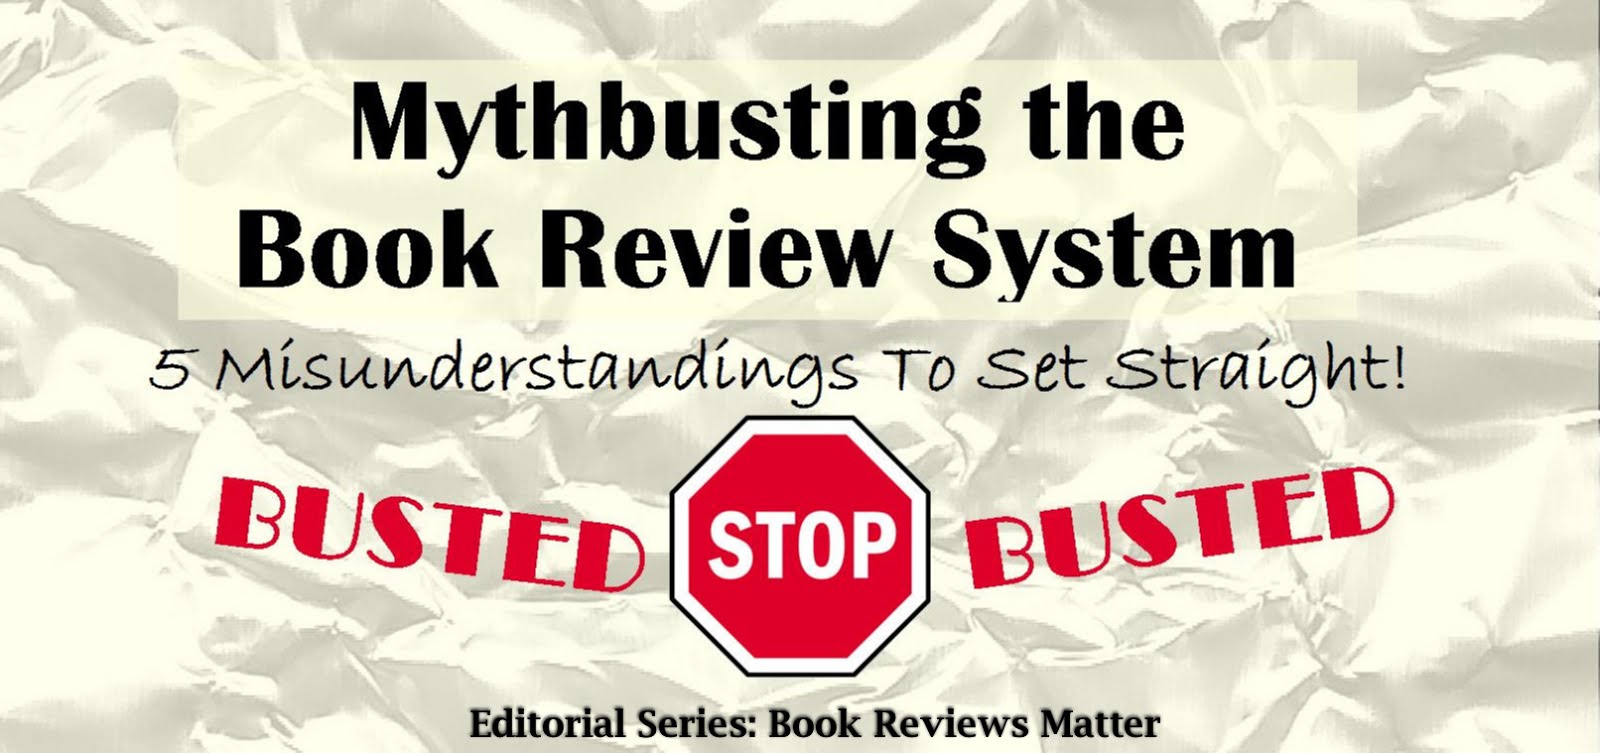 Mythbusting the Book Review System